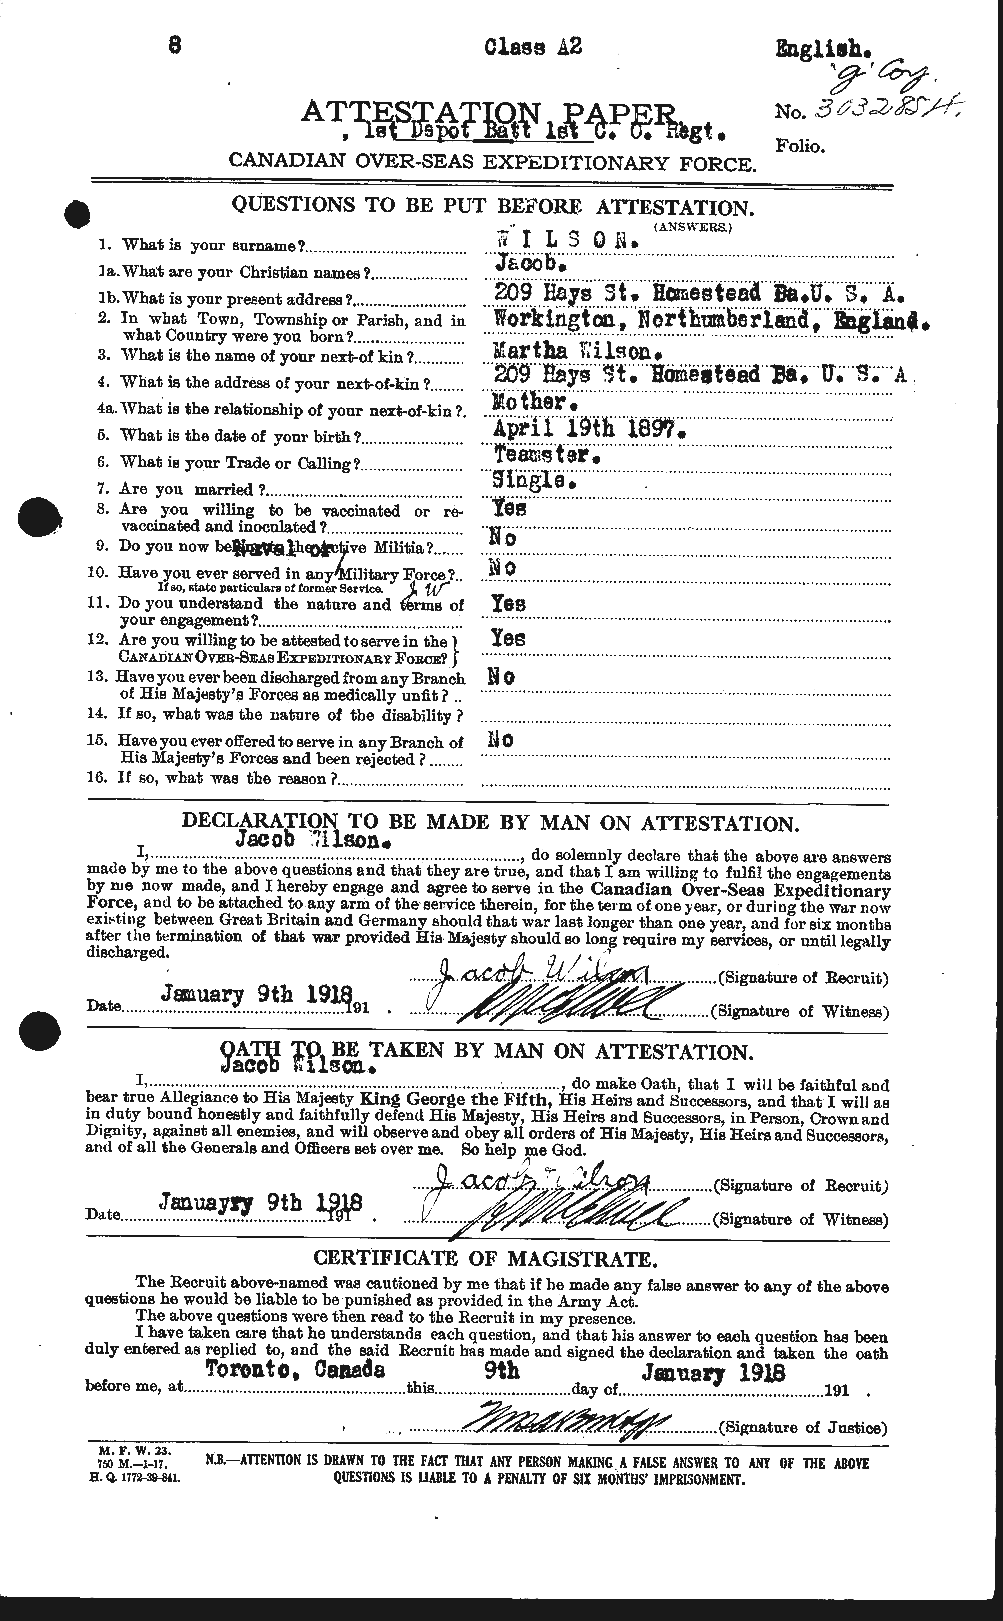 Personnel Records of the First World War - CEF 679647a